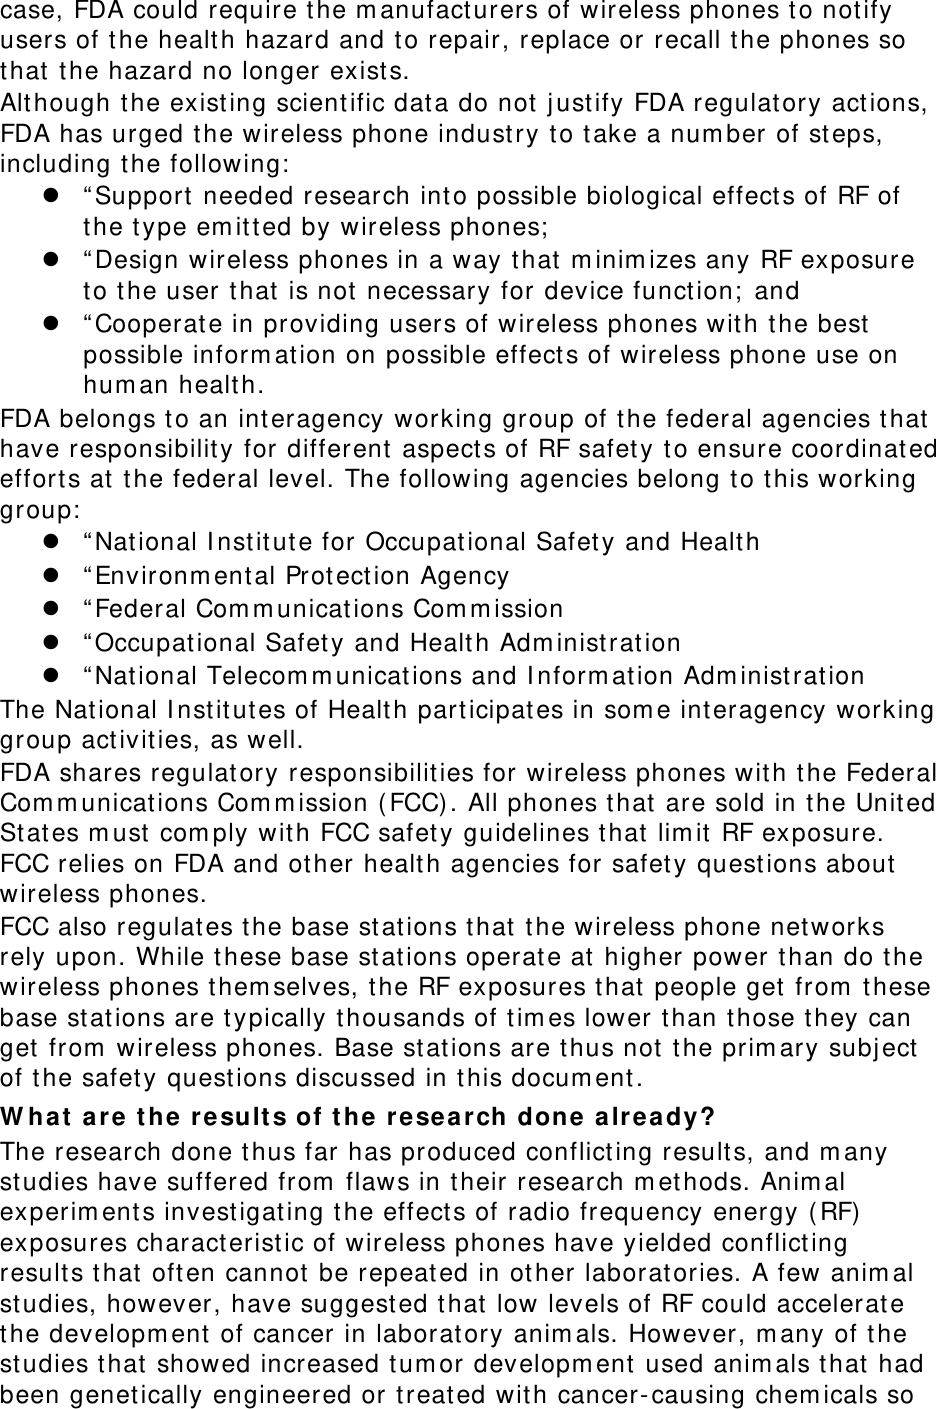 case, FDA could require t he m anufact urers of w ireless phones to notify users of t he health hazard and to repair, replace or recall t he phones so that  t he hazard no longer exist s. Alt hough t he existing scient ific data do not j ustify FDA regulat ory act ions, FDA has urged the wireless phone industry to t ake a num ber of st eps, including t he following:  z “ Support needed research int o possible biological effect s of RF of the type em it t ed by wireless phones;  z “ Design wireless phones in a way t hat m inim izes any RF exposure to t he user t hat is not necessary for device funct ion;  and z “ Cooperate in providing users of wireless phones with t he best  possible inform ation on possible effect s of wireless phone use on hum an health. FDA belongs to an int eragency working group of t he federal agencies that  have responsibility for different  aspect s of RF safet y t o ensure coordinat ed effort s at t he federal level. The following agencies belong t o this working group:  z “ National I nst itut e for Occupational Safet y and Health z “ Environm ent al Protect ion Agency z “ Federal Com m unications Com m ission z “ Occupational Safety and Healt h Adm inist ration z “ National Telecom m unicat ions and I nform ation Adm inistration The National I nst itut es of Health part icipat es in som e int eragency working group act ivities, as well. FDA shares regulat ory responsibilities for wireless phones with t he Federal Com m unicat ions Com m ission ( FCC). All phones that are sold in t he United St at es m ust com ply with FCC safety guidelines that  lim it  RF exposure. FCC relies on FDA and other health agencies for safet y quest ions about  wireless phones. FCC also regulat es t he base stat ions t hat  t he wireless phone networks rely upon. While t hese base stations operate at higher power t han do the wireless phones t hem selves, t he RF exposures t hat people get  from  t hese base stat ions are t ypically t housands of tim es lower t han t hose t hey can get  from  wireless phones. Base stations are t hus not t he prim ary subj ect  of t he safet y quest ions discussed in t his docum ent . W hat  are t he re sult s of t he  r e sea r ch done  a lre a dy? The research done thus far has produced conflict ing result s, and m any studies have suffered from  flaws in their research m ethods. Anim al experim ents invest igating t he effect s of radio frequency energy ( RF)  exposures charact erist ic of wireless phones have yielded conflict ing results that  oft en cannot be repeated in other laborat ories. A few anim al studies, however, have suggested that  low levels of RF could accelerate the developm ent  of cancer in laboratory anim als. However, m any of t he studies that  showed increased t um or developm ent used anim als t hat had been genet ically engineered or t reated with cancer- causing chem icals so 